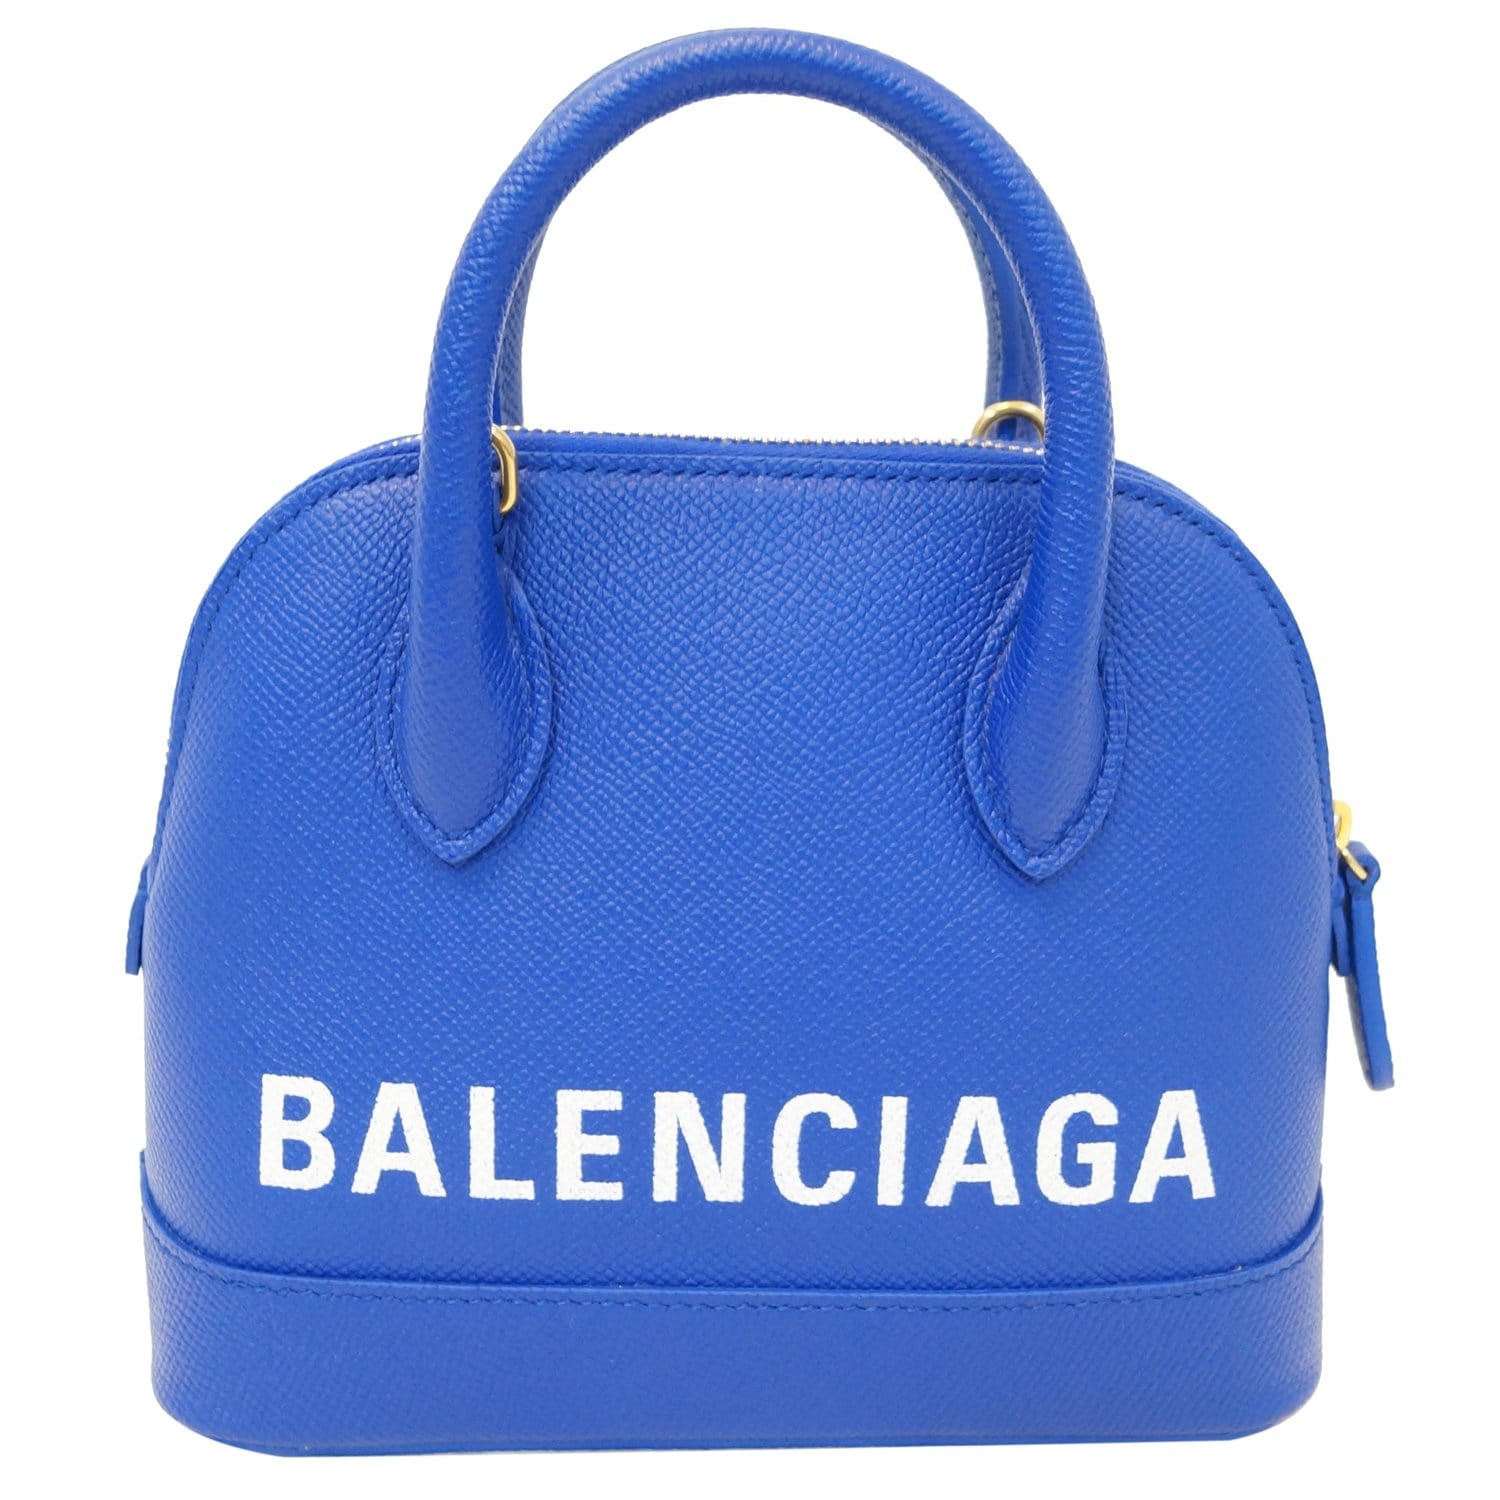 Balenciagas 2145 bag is just like Ikeas 99 cent tote  CNN